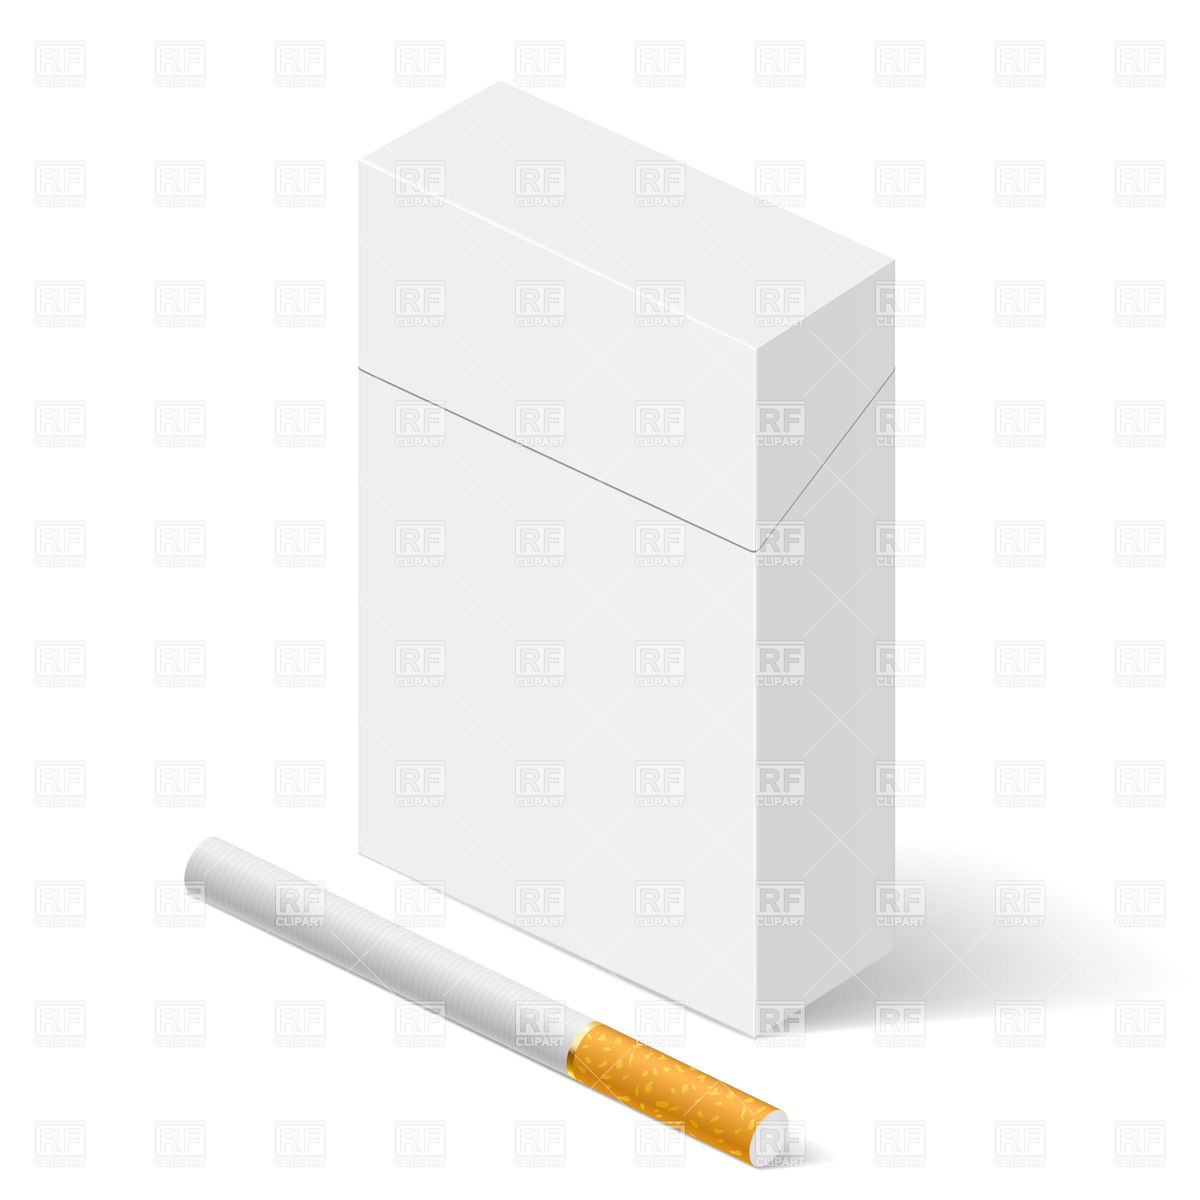 Cigarette Pack Vector Closed Full Pack Of Cigarettes